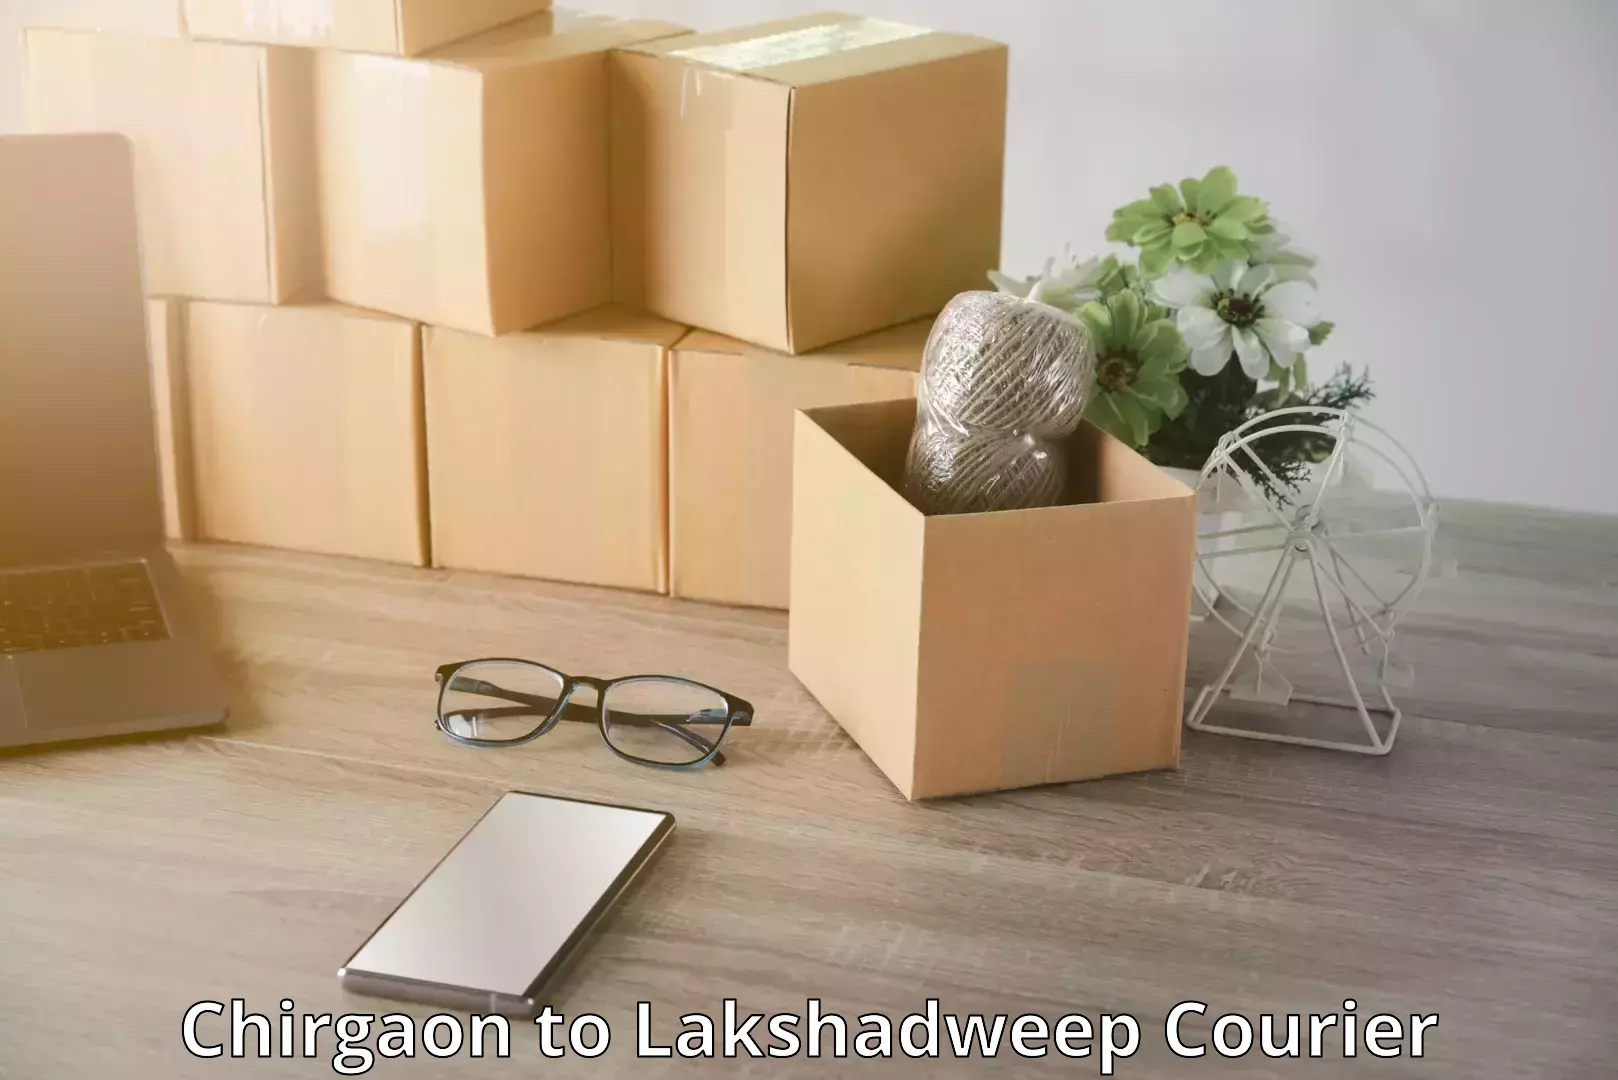 Luggage delivery news Chirgaon to Lakshadweep